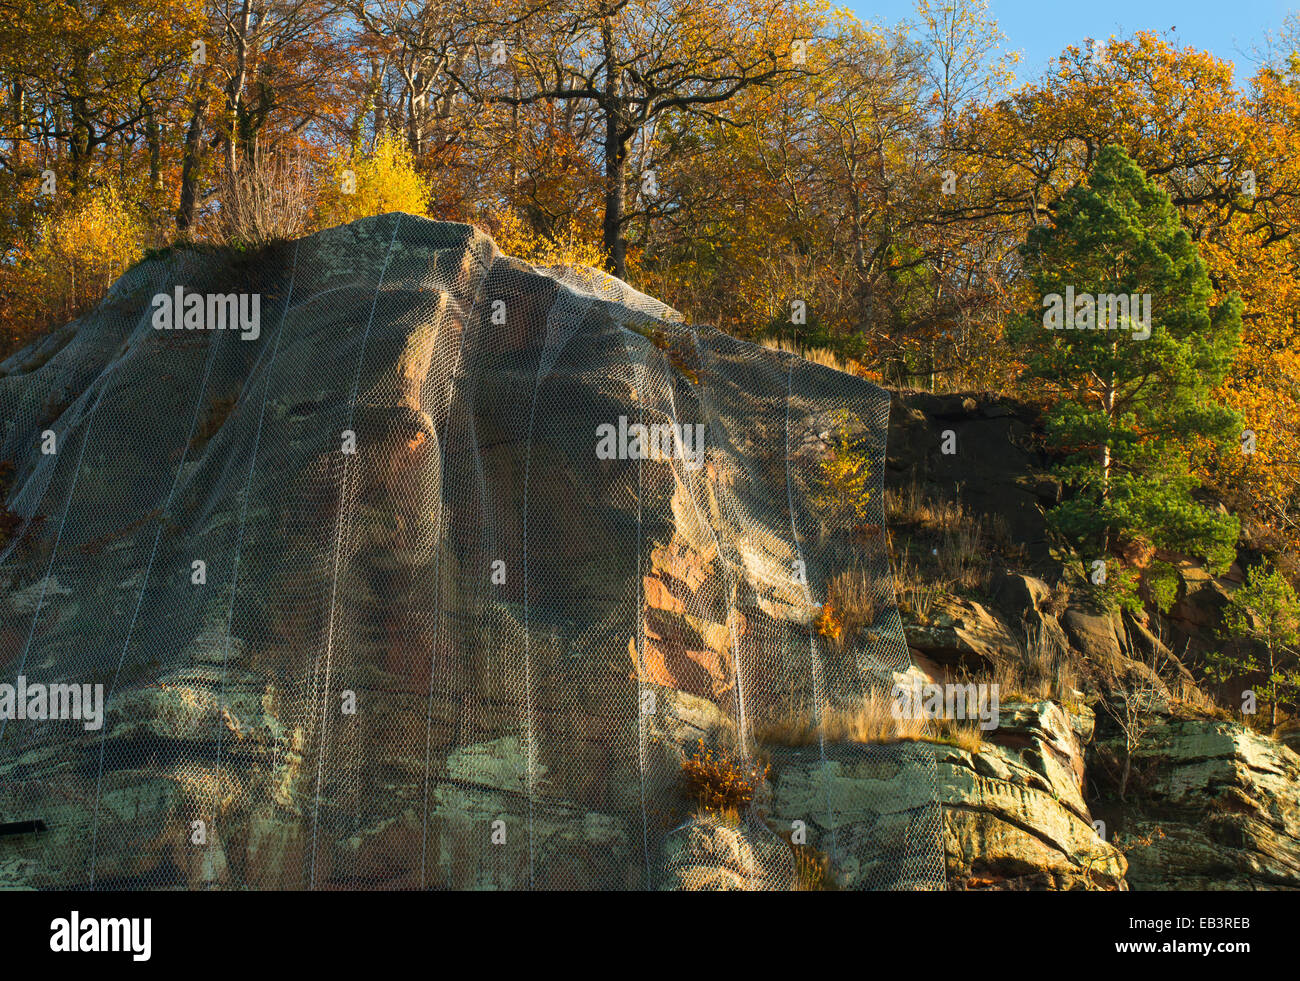 Metal netting covering High Rock, a sandstone cliff face, to prevent falling rock, Bridgnorth, Shropshire, England. Stock Photo